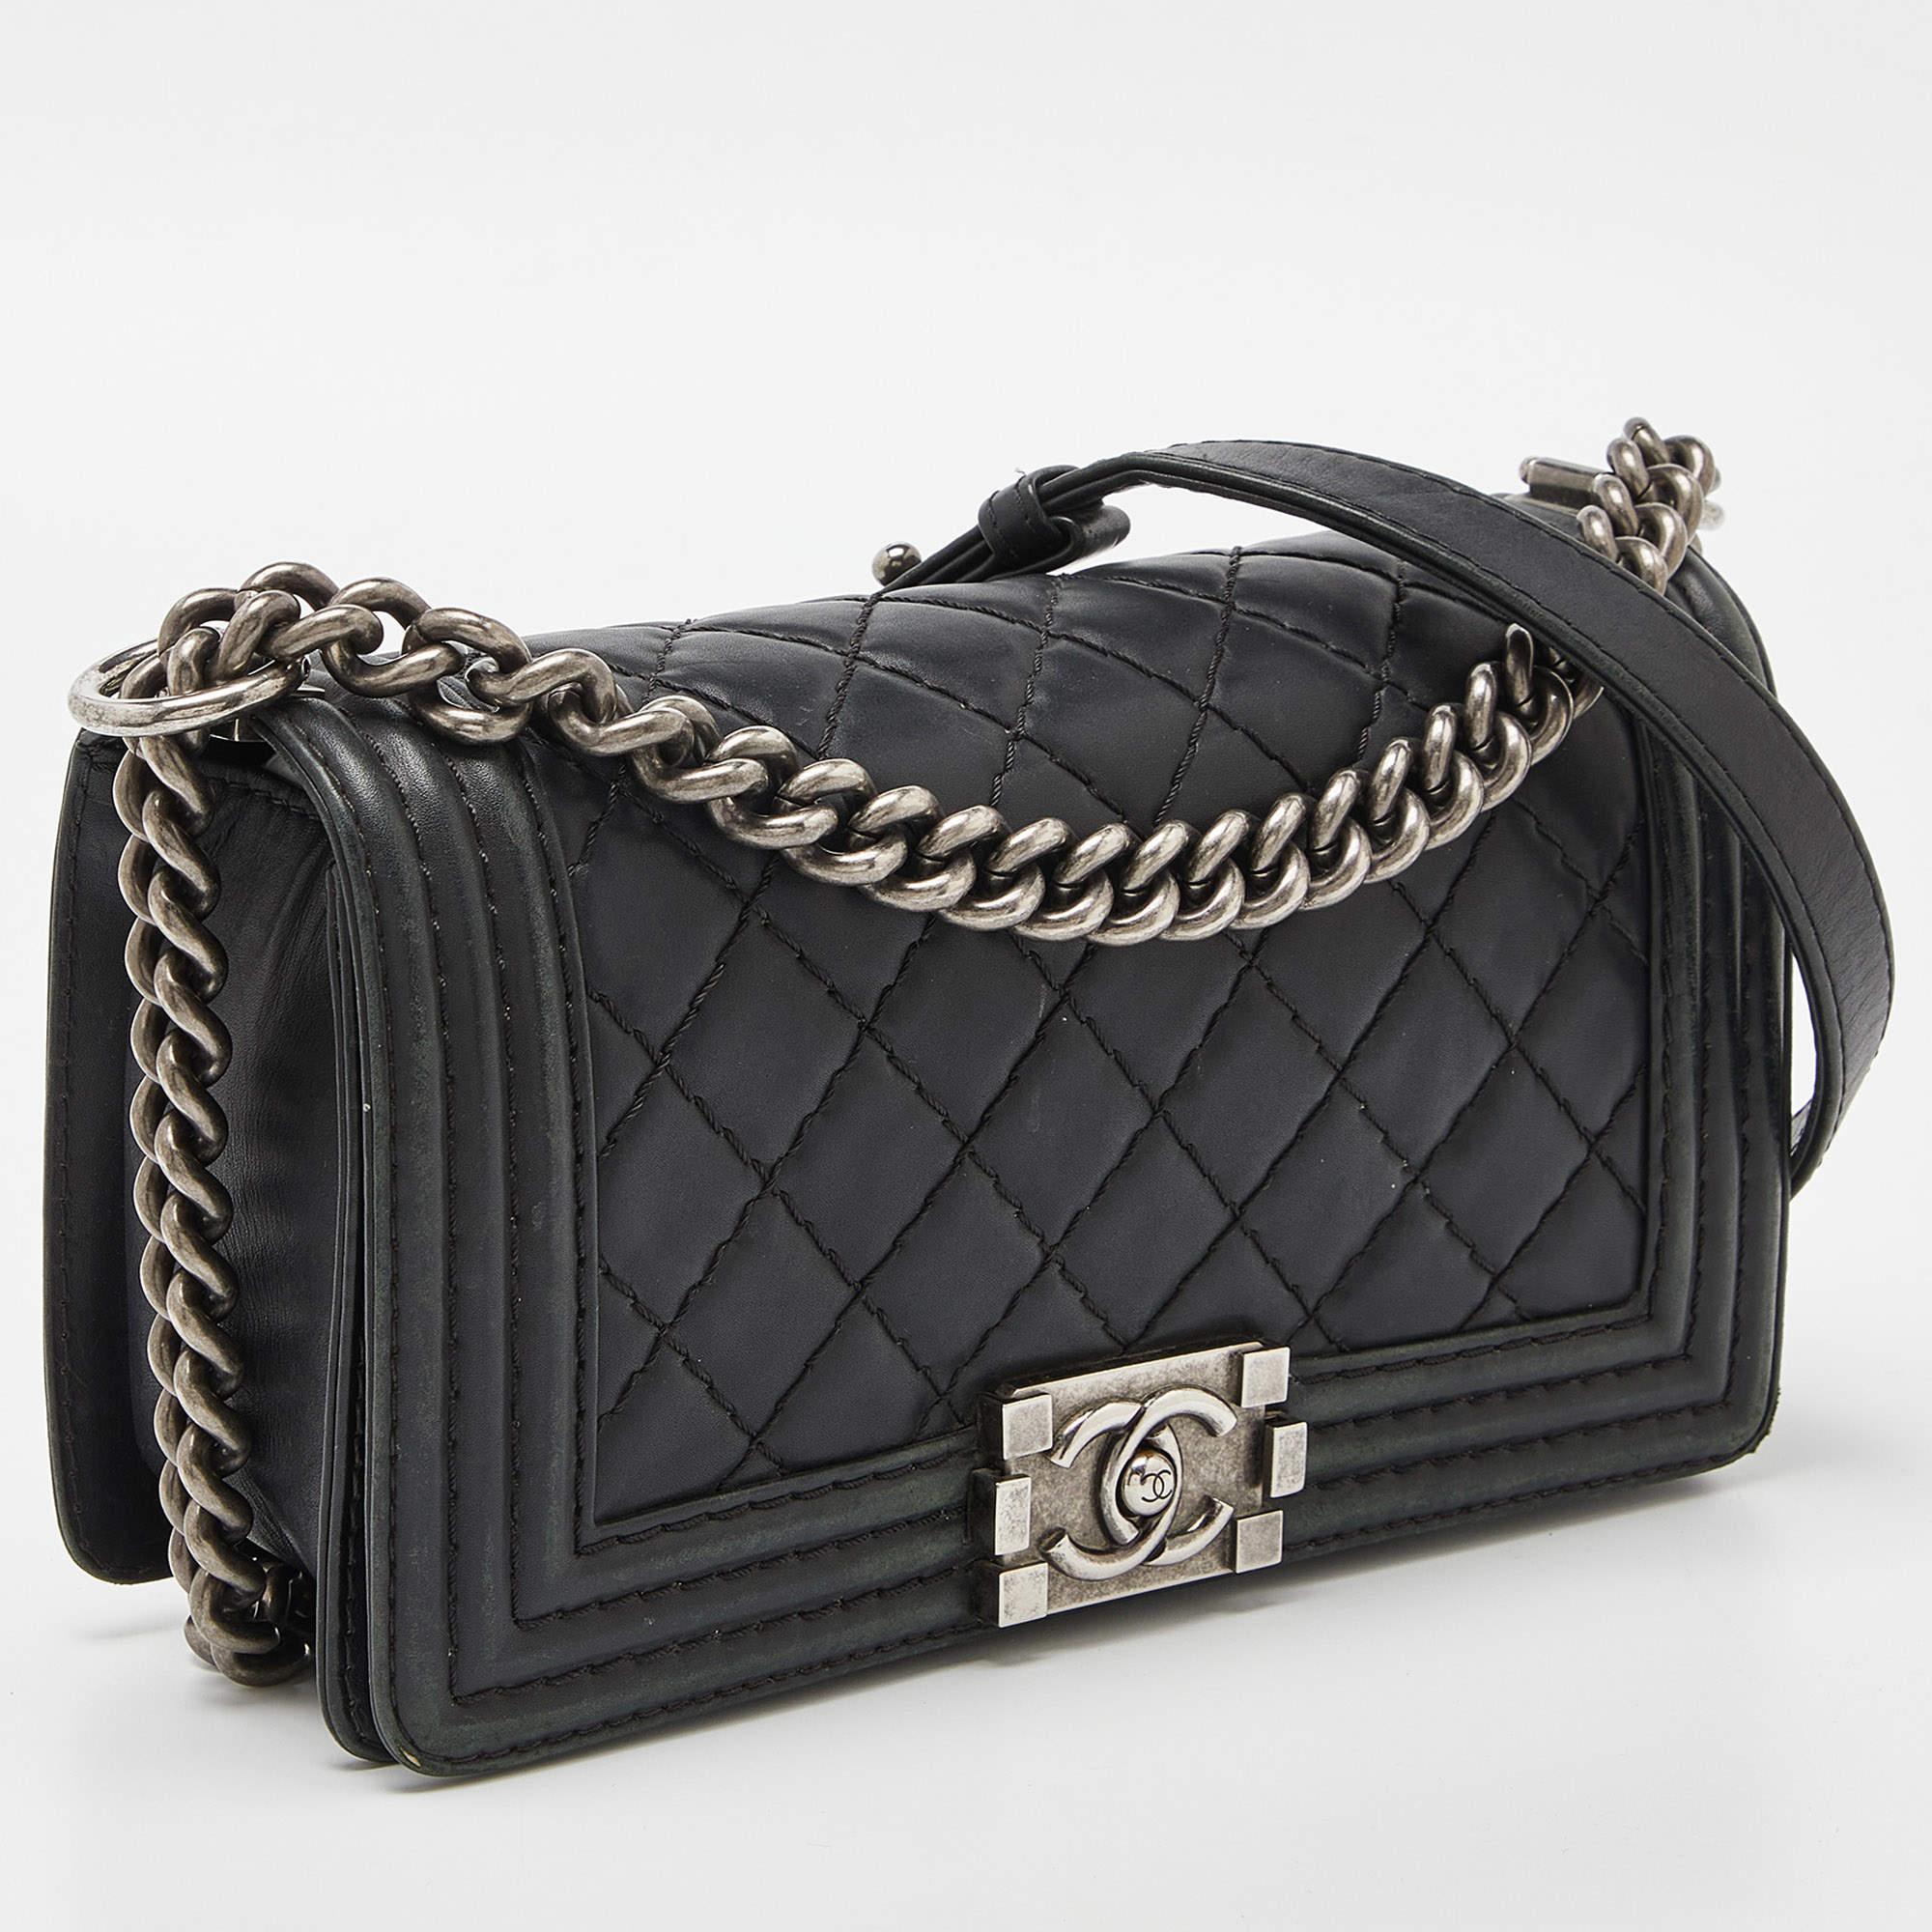 Women's Chanel Black Quilted Wild Stitched Leather Medium Boy Bag